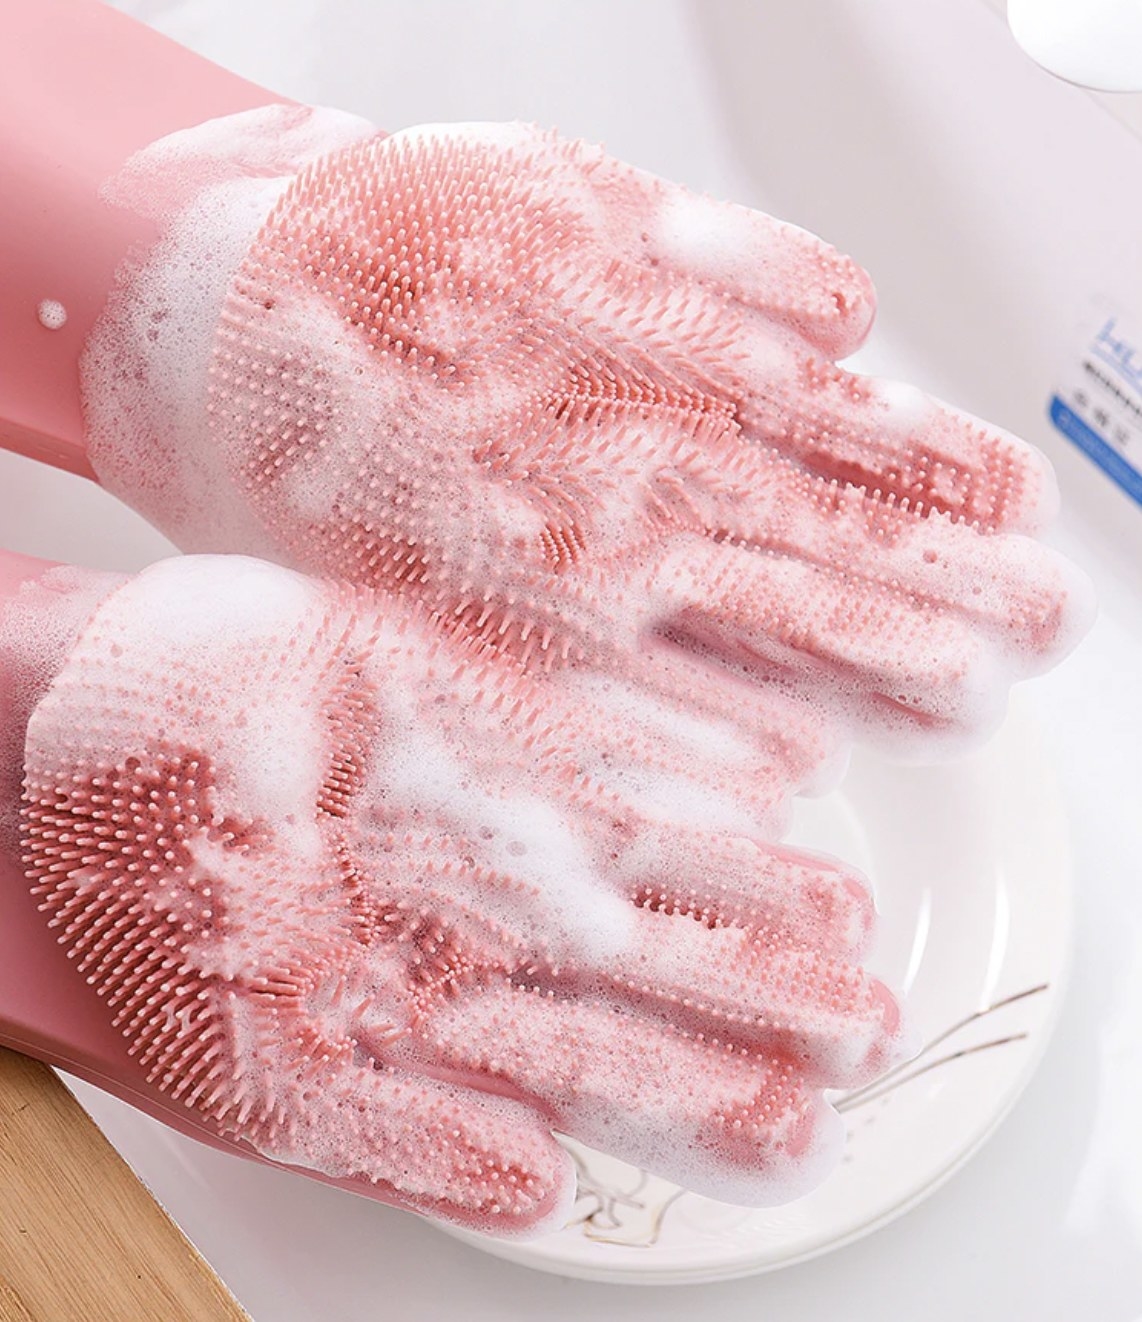 Someone wearing the pink gloves and showing the bristled palms covered in soapy water